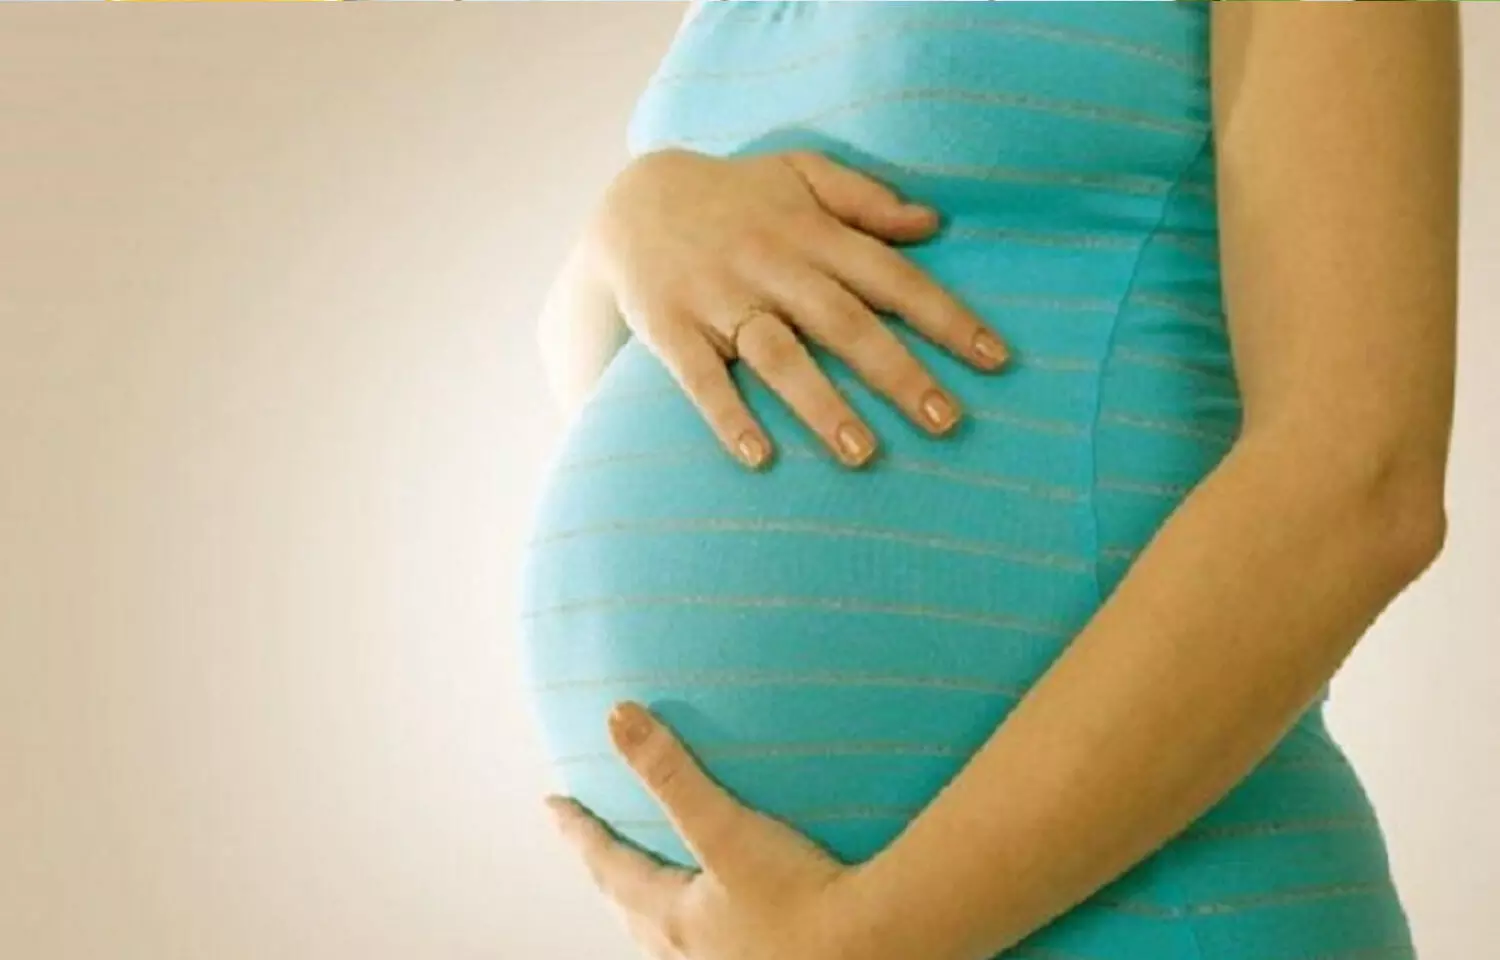 Chronic hypertension treatment in pregnancy improves fetal and maternal outcomes: Study